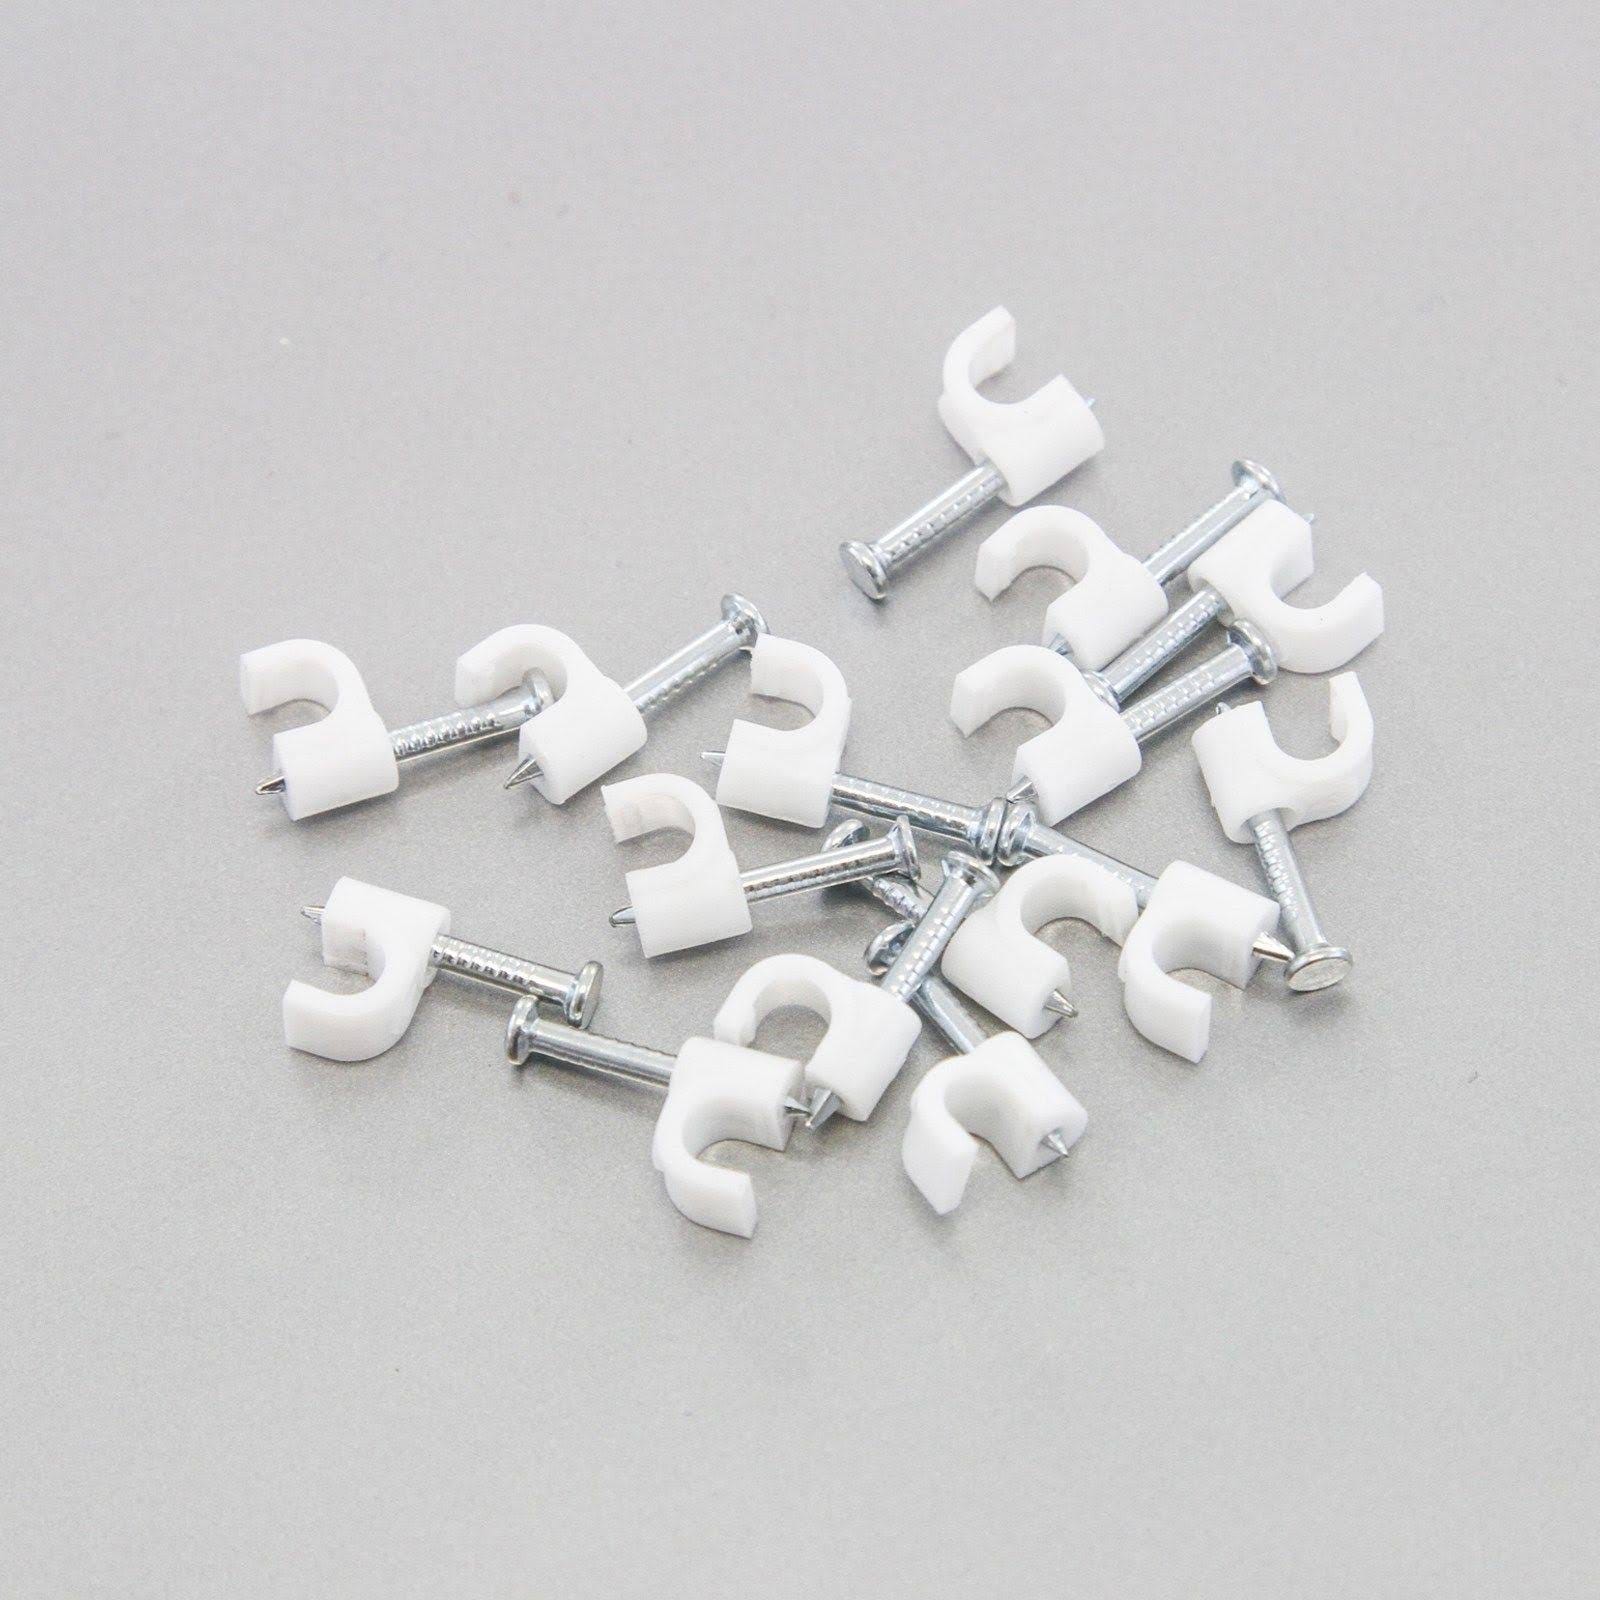 Easy Nail-In Cable Clip Set for Securing Wire and Cables (1000 Round 3/16